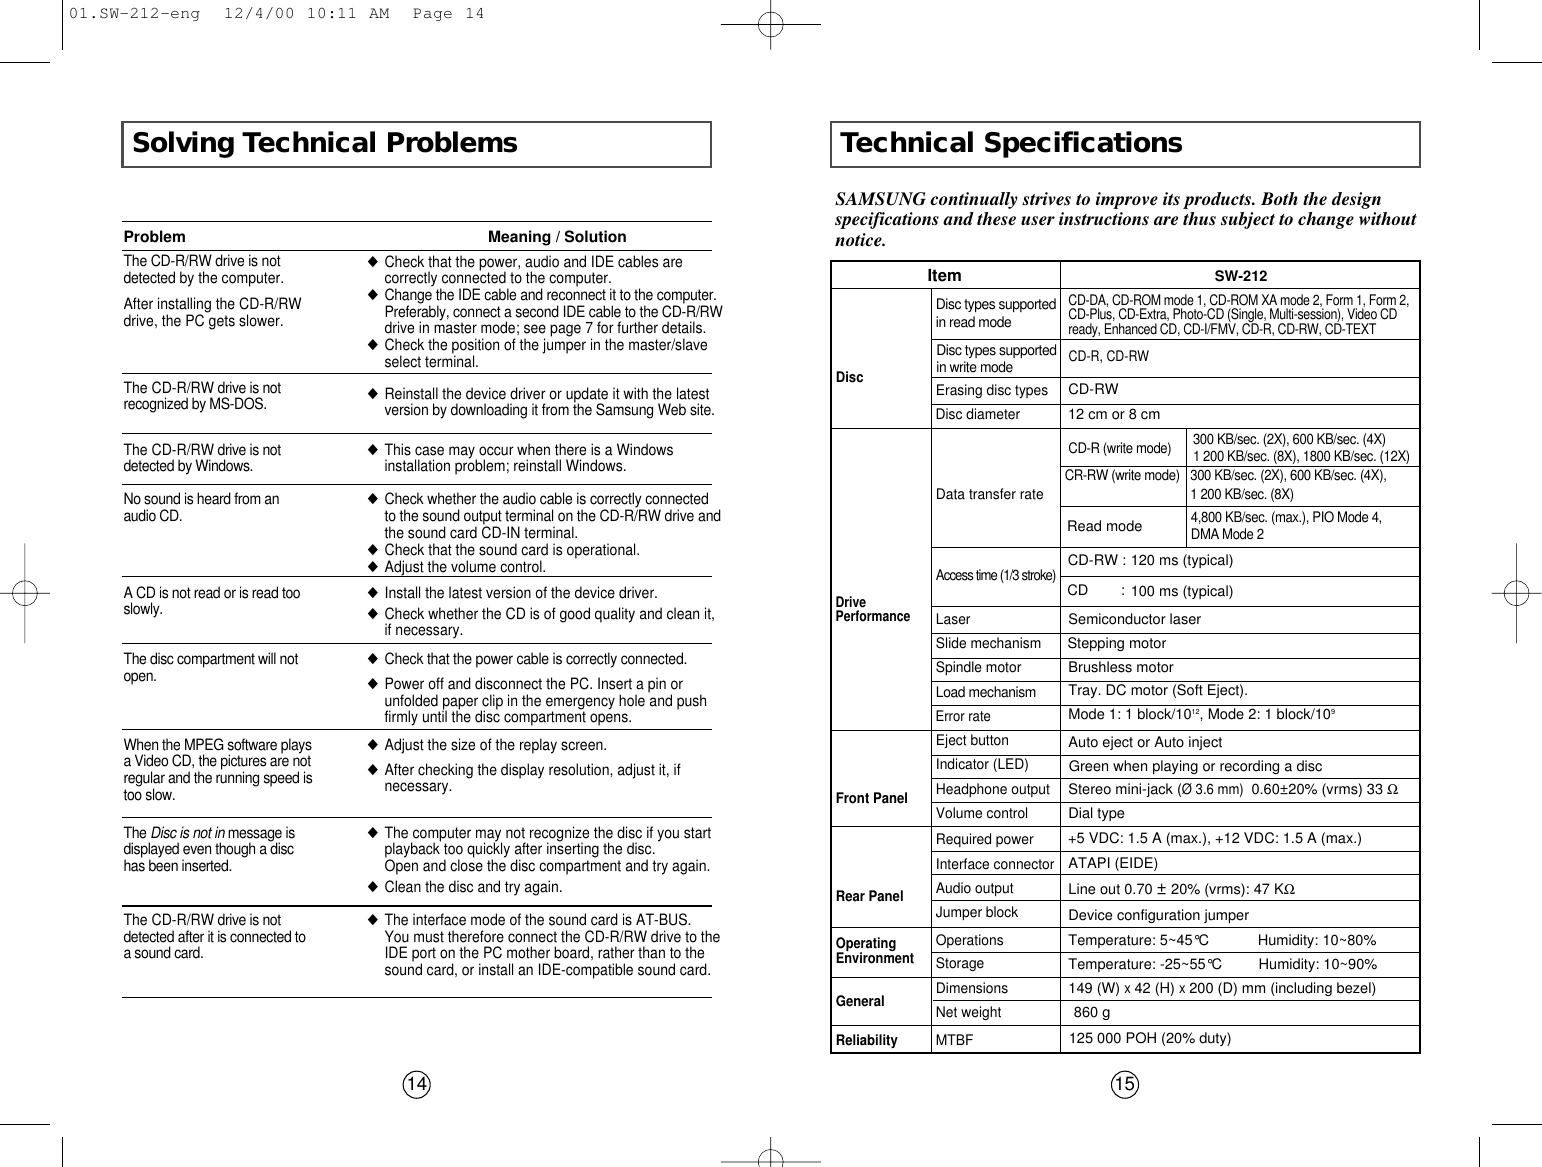 Technical Specifications15SAMSUNG continually strives to improve its products. Both the designspecifications and these user instructions are thus subject to change withoutnotice.CD-R (write mode)   300 KB/sec. (2X), 600 KB/sec. (4X)1 200 KB/sec. (8X), 1800 KB/sec. (12X)DiscError rateRear PanelFront PanelOperatingEnvironmentGeneralReliabilityDrivePerformanceDisc diameterDisc types supportedin read modeData transfer rateAccess time (1/3 stroke)LaserSlide mechanismSpindle motorLoad mechanismEject buttonIndicator (LED)Headphone outputVolume controlDimensionsNet weightOperationsStorage Required powerInterface connectorAudio outputJumper blockMTBFCD-DA, CD-ROM mode 1, CD-ROM XA mode 2, Form 1, Form 2,CD-Plus, CD-Extra, Photo-CD (Single, Multi-session), Video CDready, Enhanced CD, CD-I/FMV, CD-R, CD-RW, CD-TEXT12 cm or 8 cmErasing disc typesCD-RWRead mode 120 ms (typical)Semiconductor laserStepping motorBrushless motorTray. DC motor (Soft Eject). Mode 1: 1 block/1012, Mode 2: 1 block/109Auto eject or Auto injectGreen when playing or recording a discStereo mini-jack (Ø 3.6 mm) 0.60±20% (vrms) 33 ΩDial type+5 VDC: 1.5 A (max.), +12 VDC: 1.5 A (max.)ATAPI (EIDE)Line out 0.70 ±20% (vrms): 47 KΩDevice configuration jumperTemperature: 5~45°C            Humidity: 10~80%149 (W) x 42 (H) x 200 (D) mm (including bezel)860 g 125 000 POH (20% duty)100 ms (typical)Item SW-212Temperature: -25~55°C         Humidity: 10~90%Solving Technical Problems14The CD-R/RW drive is notdetected by the computer.After installing the CD-R/RWdrive, the PC gets slower.◆Check that the power, audio and IDE cables arecorrectly connected to the computer.◆Change the IDE cable and reconnect it to the computer.Preferably, connect a second IDE cable to the CD-R/RWdrive in master mode; see page 7 for further details.◆Check the position of the jumper in the master/slaveselect terminal.Problem Meaning / SolutionThe CD-R/RW drive is notrecognized by MS-DOS. ◆Reinstall the device driver or update it with the latestversion by downloading it from the Samsung Web site.The CD-R/RW drive is notdetected by Windows. ◆This case may occur when there is a Windowsinstallation problem; reinstall Windows.No sound is heard from anaudio CD. ◆Check whether the audio cable is correctly connected to the sound output terminal on the CD-R/RW drive andthe sound card CD-IN terminal. ◆Check that the sound card is operational.◆Adjust the volume control.A CD is not read or is read tooslowly. ◆Install the latest version of the device driver.◆Check whether the CD is of good quality and clean it, if necessary.When the MPEG software playsa Video CD, the pictures are notregular and the running speed istoo slow.◆Adjust the size of the replay screen.◆After checking the display resolution, adjust it, ifnecessary.The Disc is not in message isdisplayed even though a dischas been inserted.◆The computer may not recognize the disc if you startplayback too quickly after inserting the disc. Open and close the disc compartment and try again.◆Clean the disc and try again.The CD-R/RW drive is notdetected after it is connected toa sound card.◆The interface mode of the sound card is AT-BUS. You must therefore connect the CD-R/RW drive to theIDE port on the PC mother board, rather than to thesound card, or install an IDE-compatible sound card.The disc compartment will notopen. ◆Check that the power cable is correctly connected.◆Power off and disconnect the PC. Insert a pin orunfolded paper clip in the emergency hole and pushfirmly until the disc compartment opens.300 KB/sec. (2X), 600 KB/sec. (4X), 1 200 KB/sec. (8X)4,800 KB/sec. (max.), PIO Mode 4,DMA Mode 2CD-R, CD-RWDisc types supported in write modeCR-RW (write mode)CD-RW :CD        :01.SW-212-eng  12/4/00 10:11 AM  Page 14